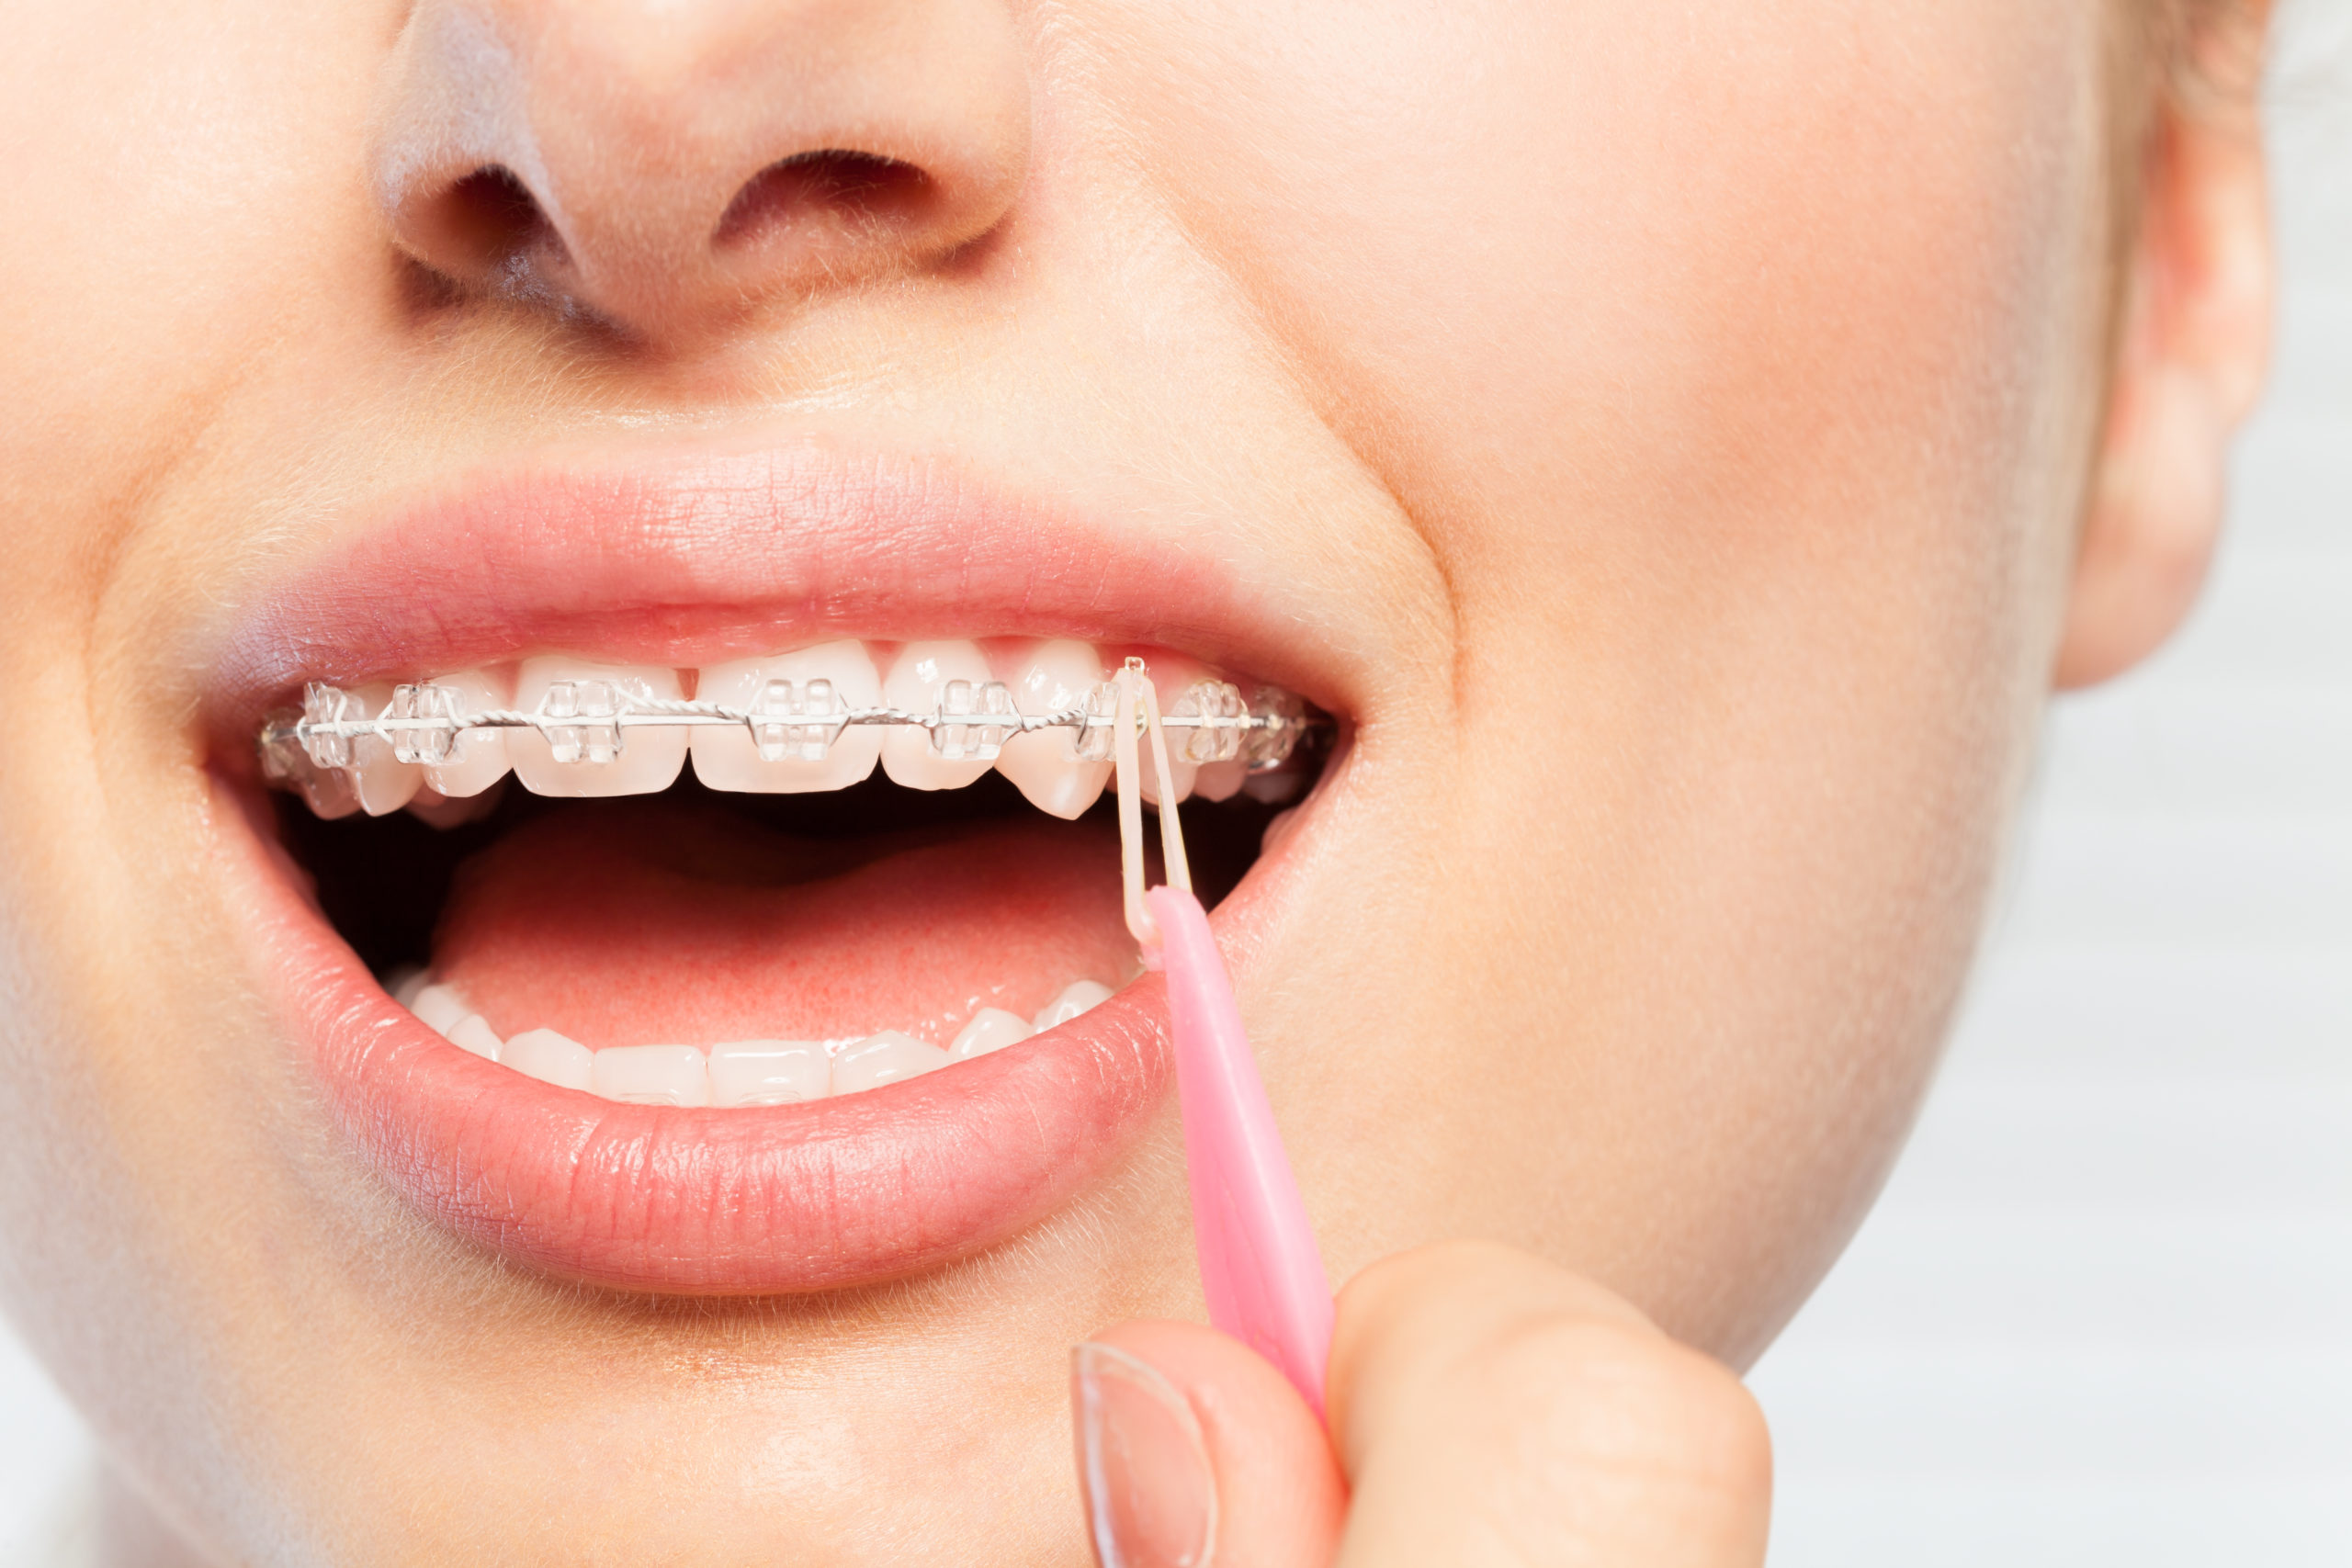 The effects of wearing Elastics (Rubber Bands) during braces..